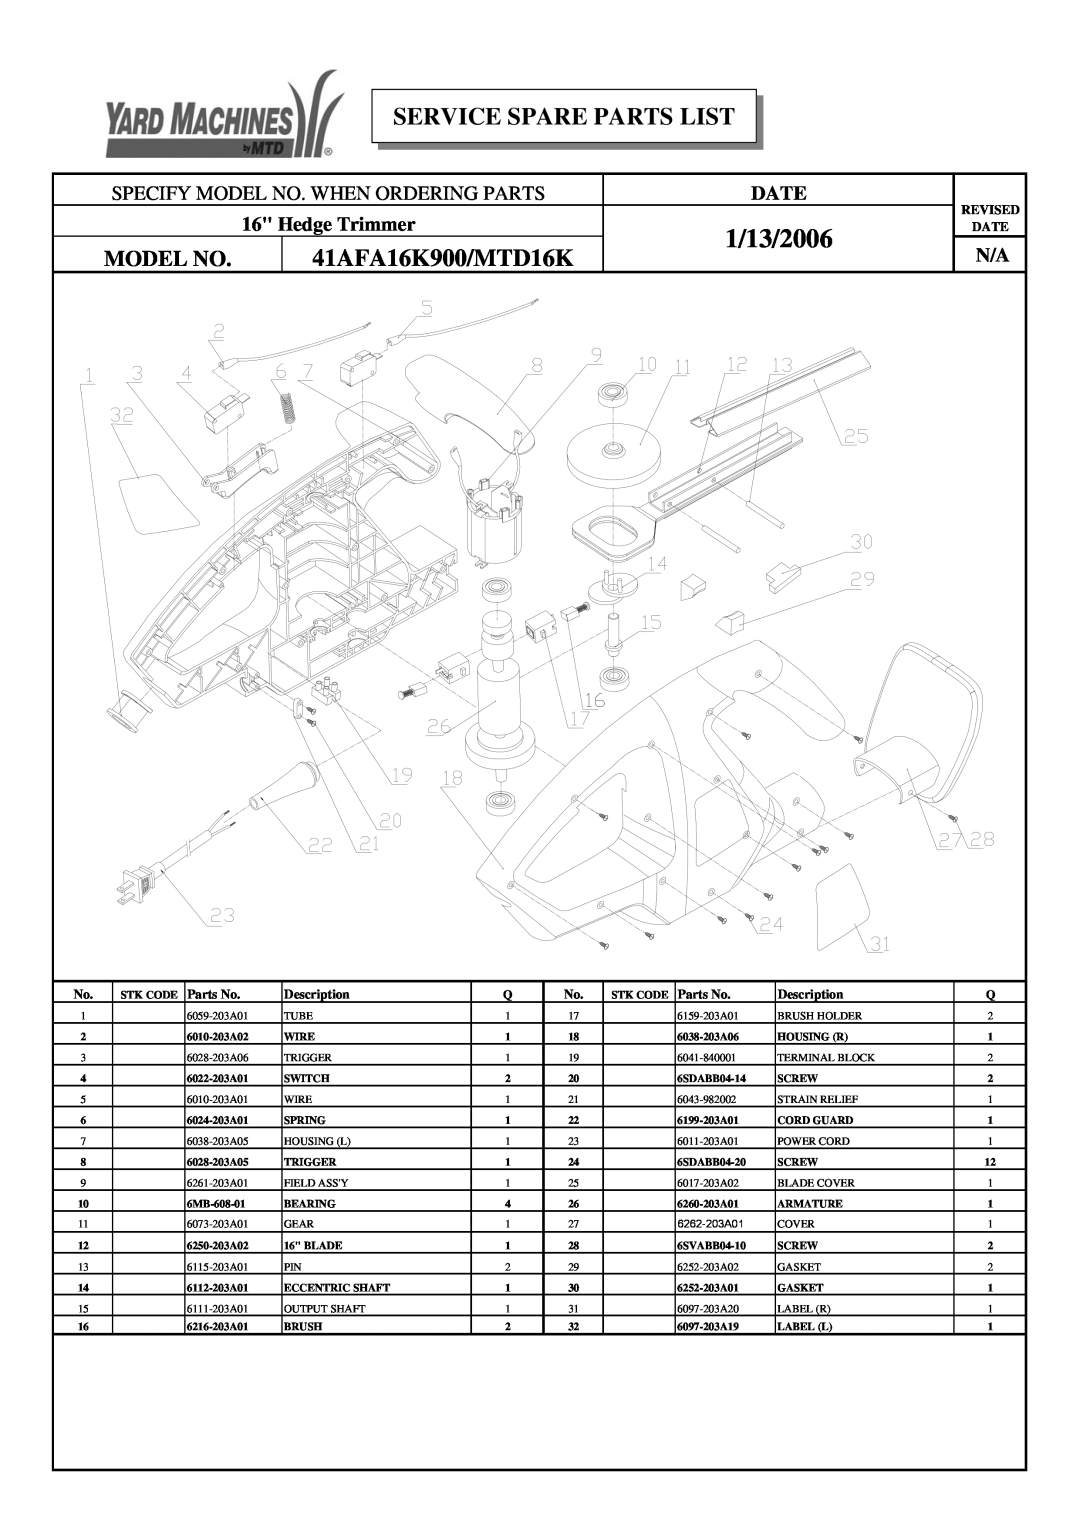 Yard Machines manual 1/13/2006, Service Spare Parts List, 41AFA16K900/MTD16K, Model No, Date, Hedge Trimmer, Revised 